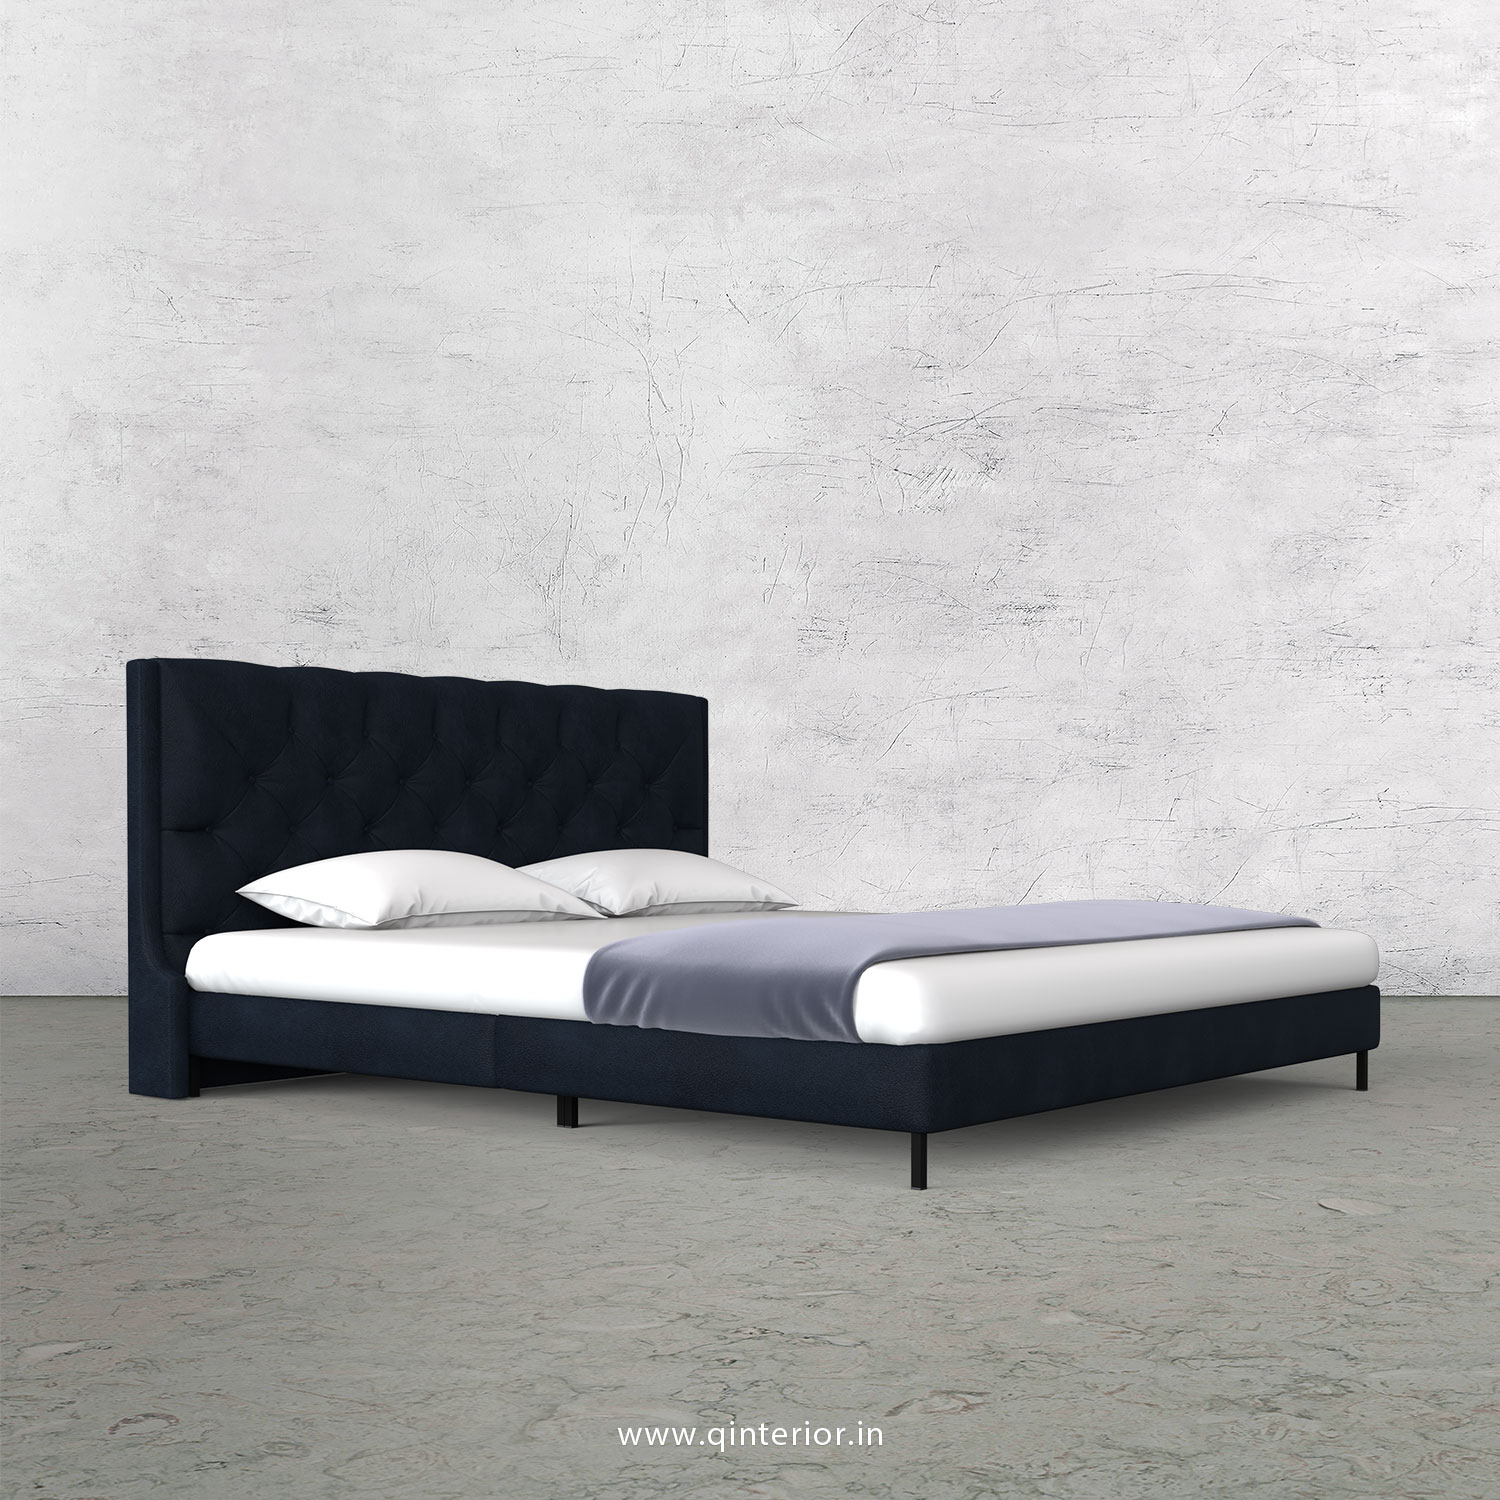 Scorpius Queen Size Bed with Fab Leather Fabric - QBD003 FL05